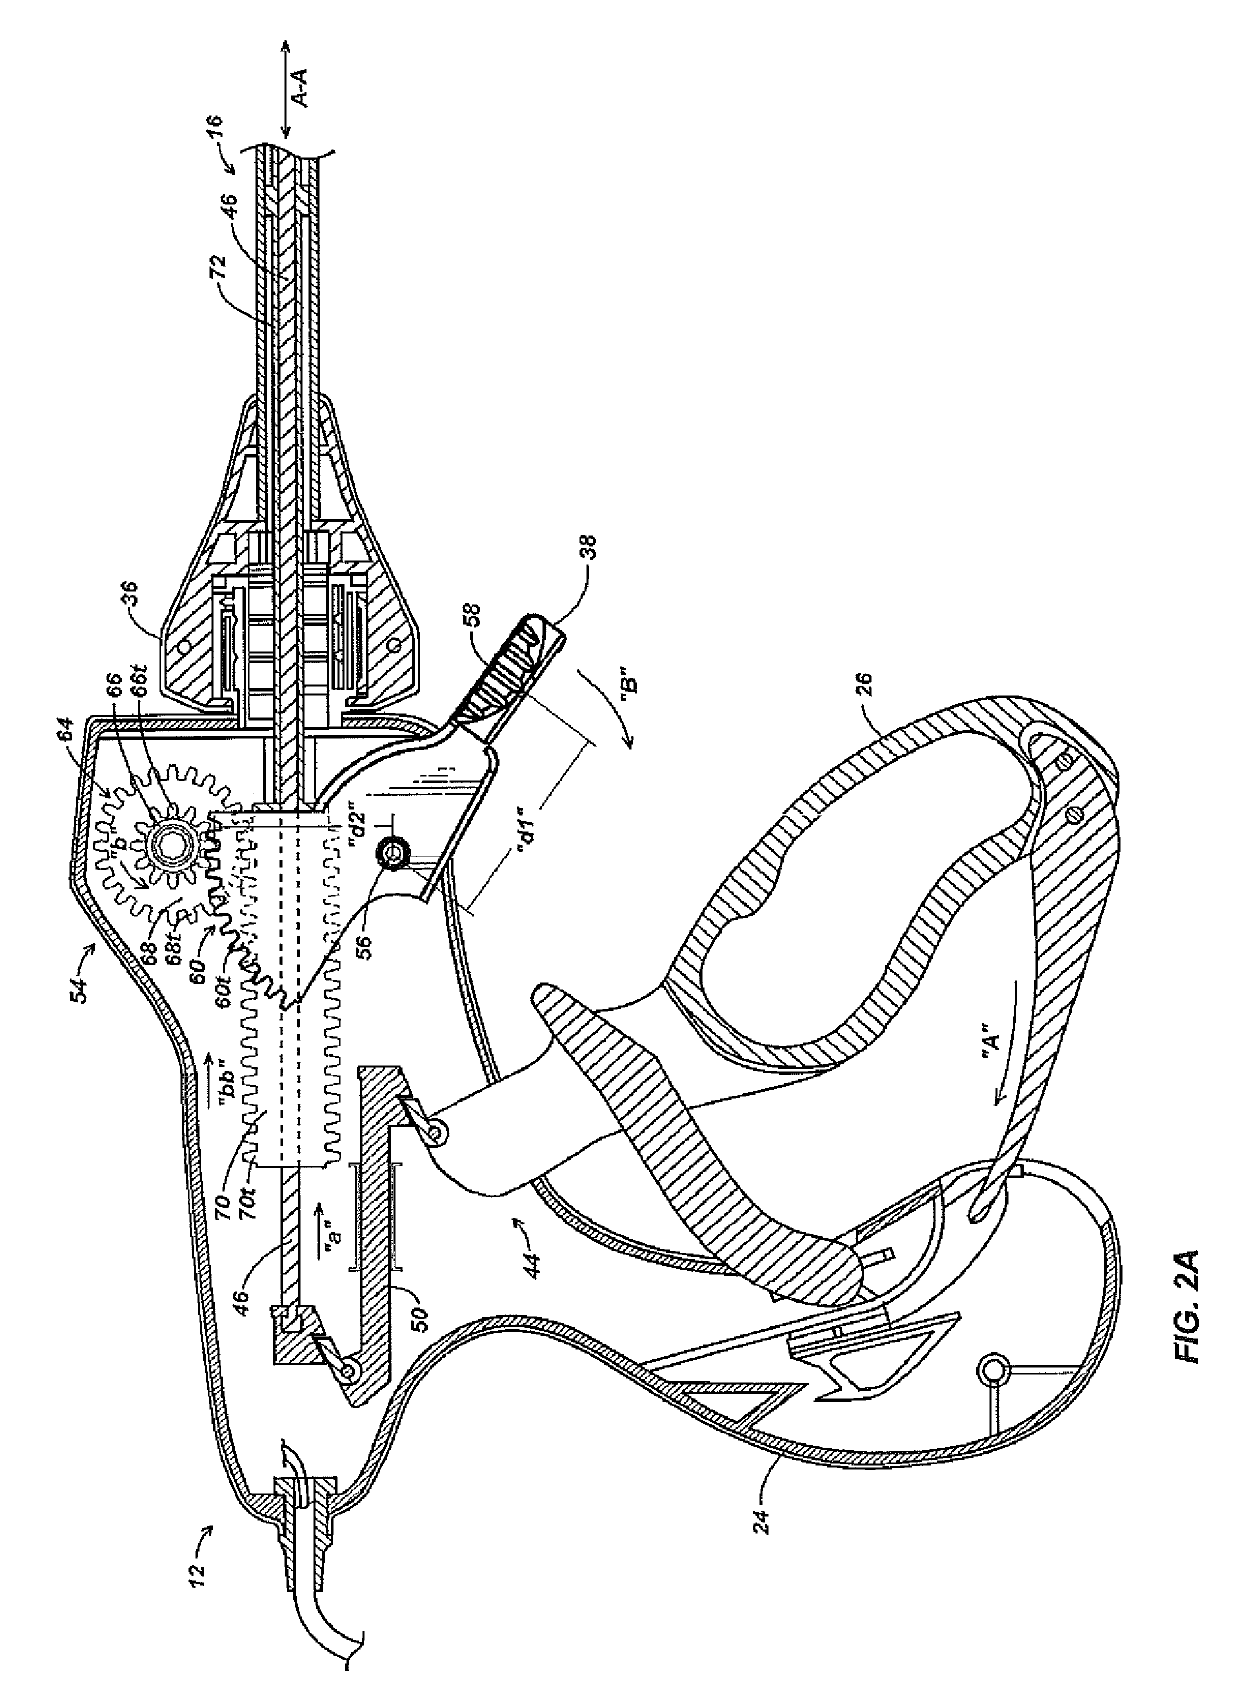 Pinion blade drive mechanism for a laparoscopic vessel dissector